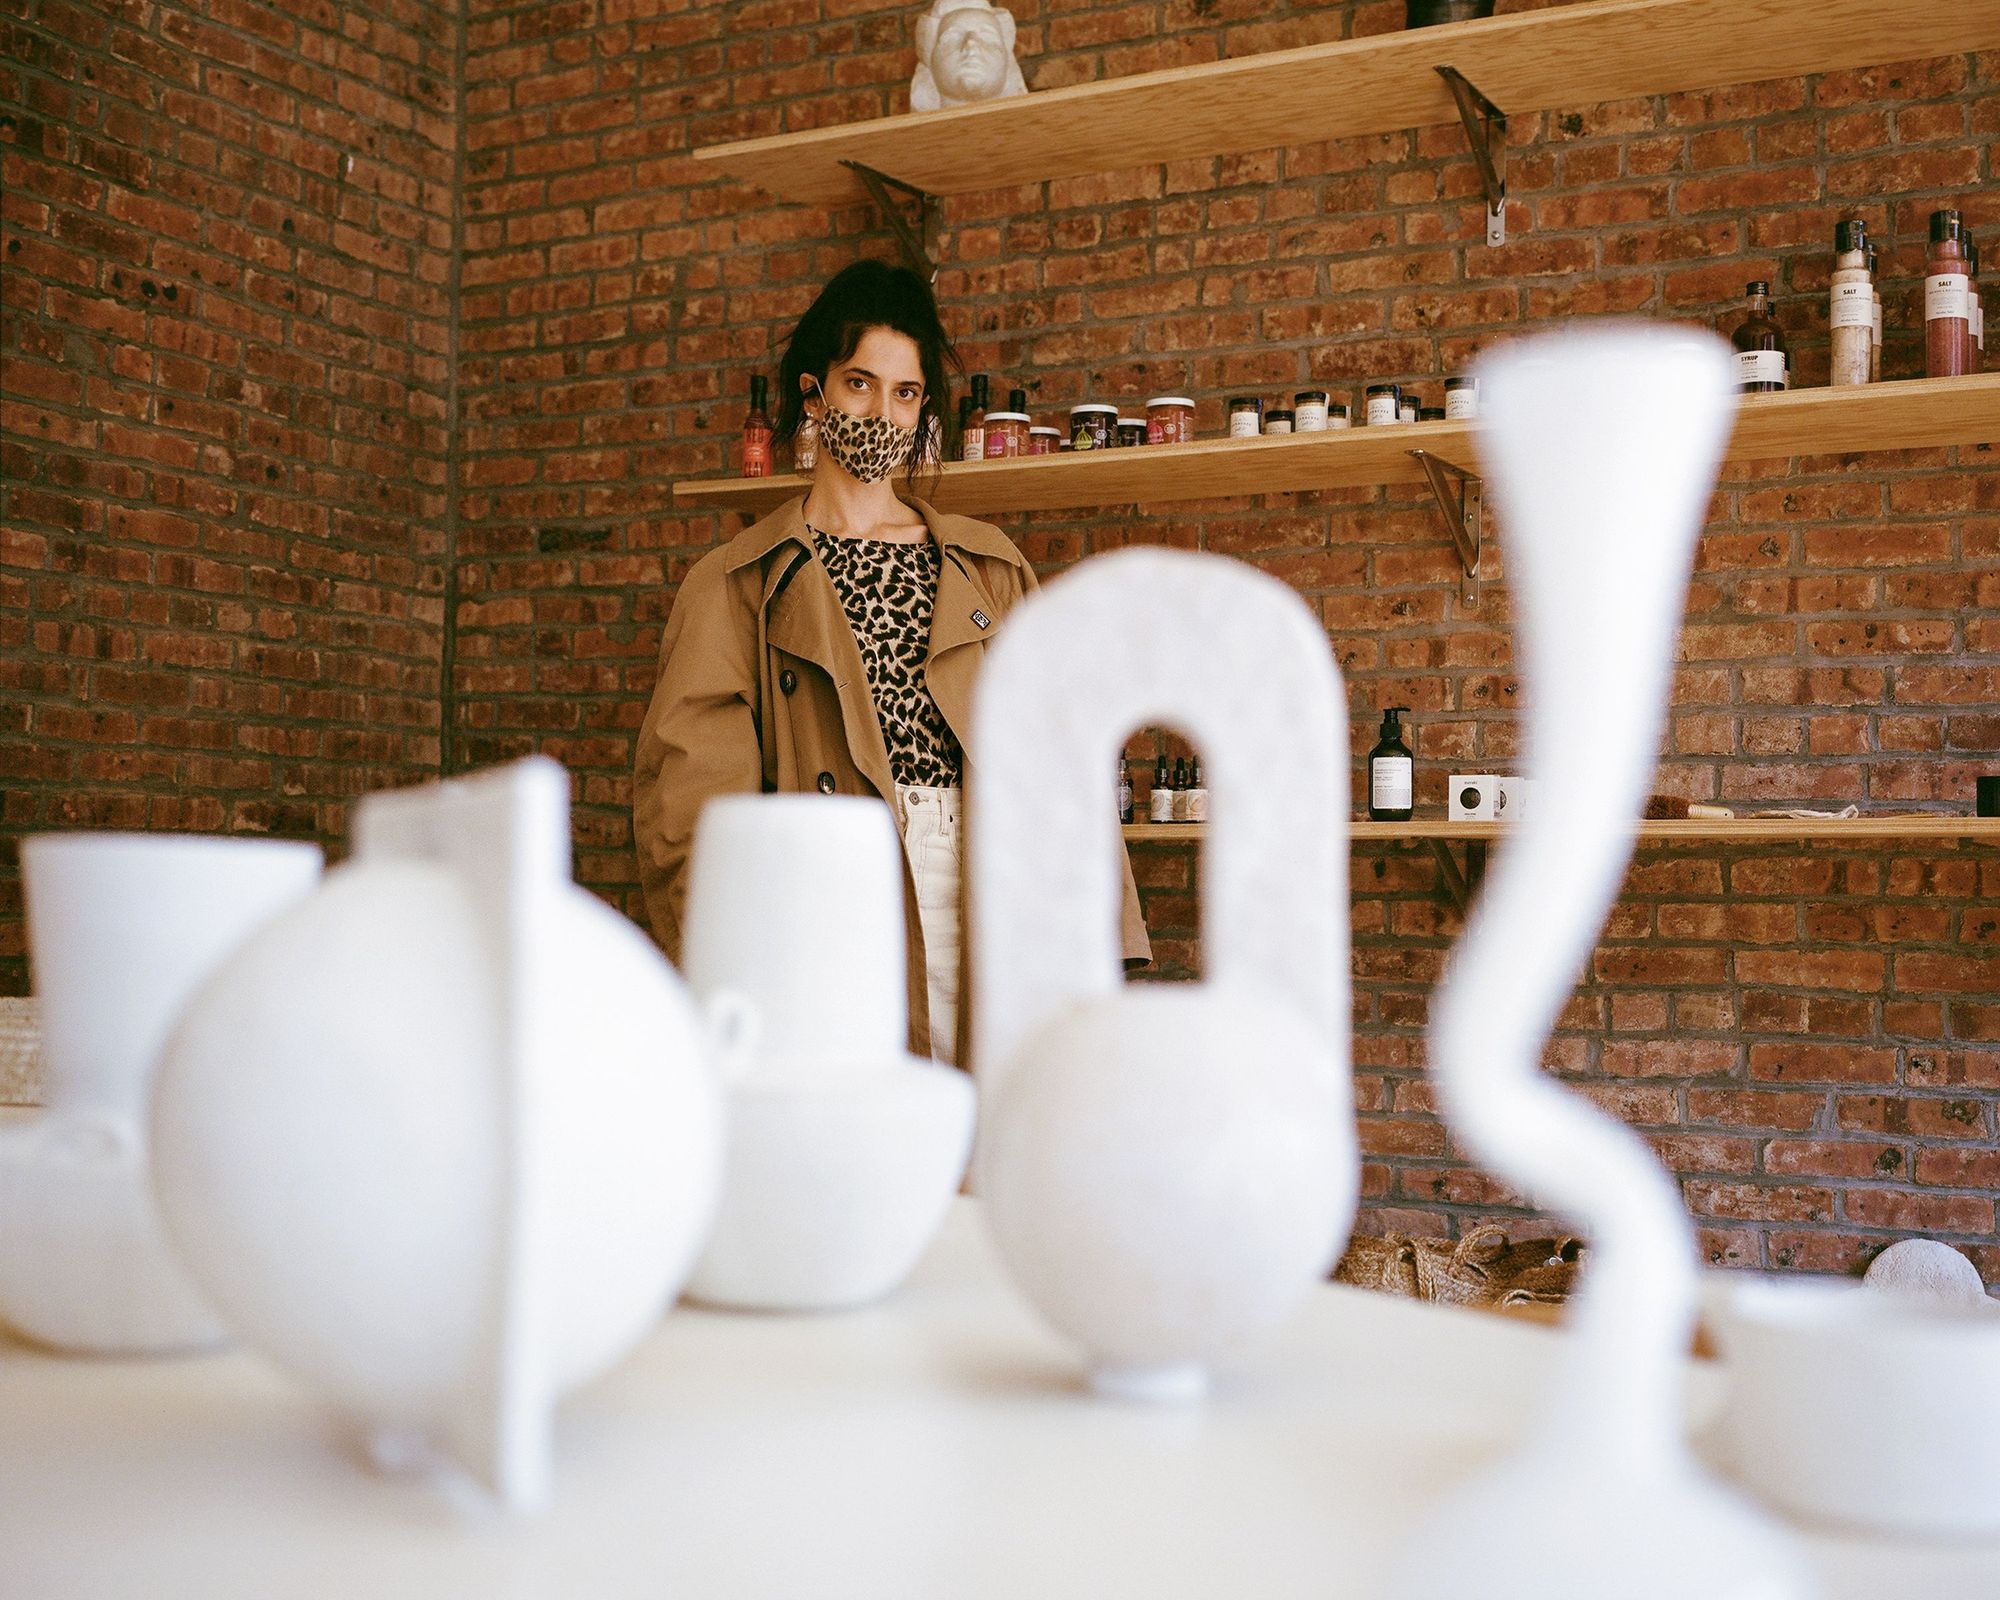 Anna Polonsky posing in front of sculptural vases at Raini Home in bedford-stuyvesant